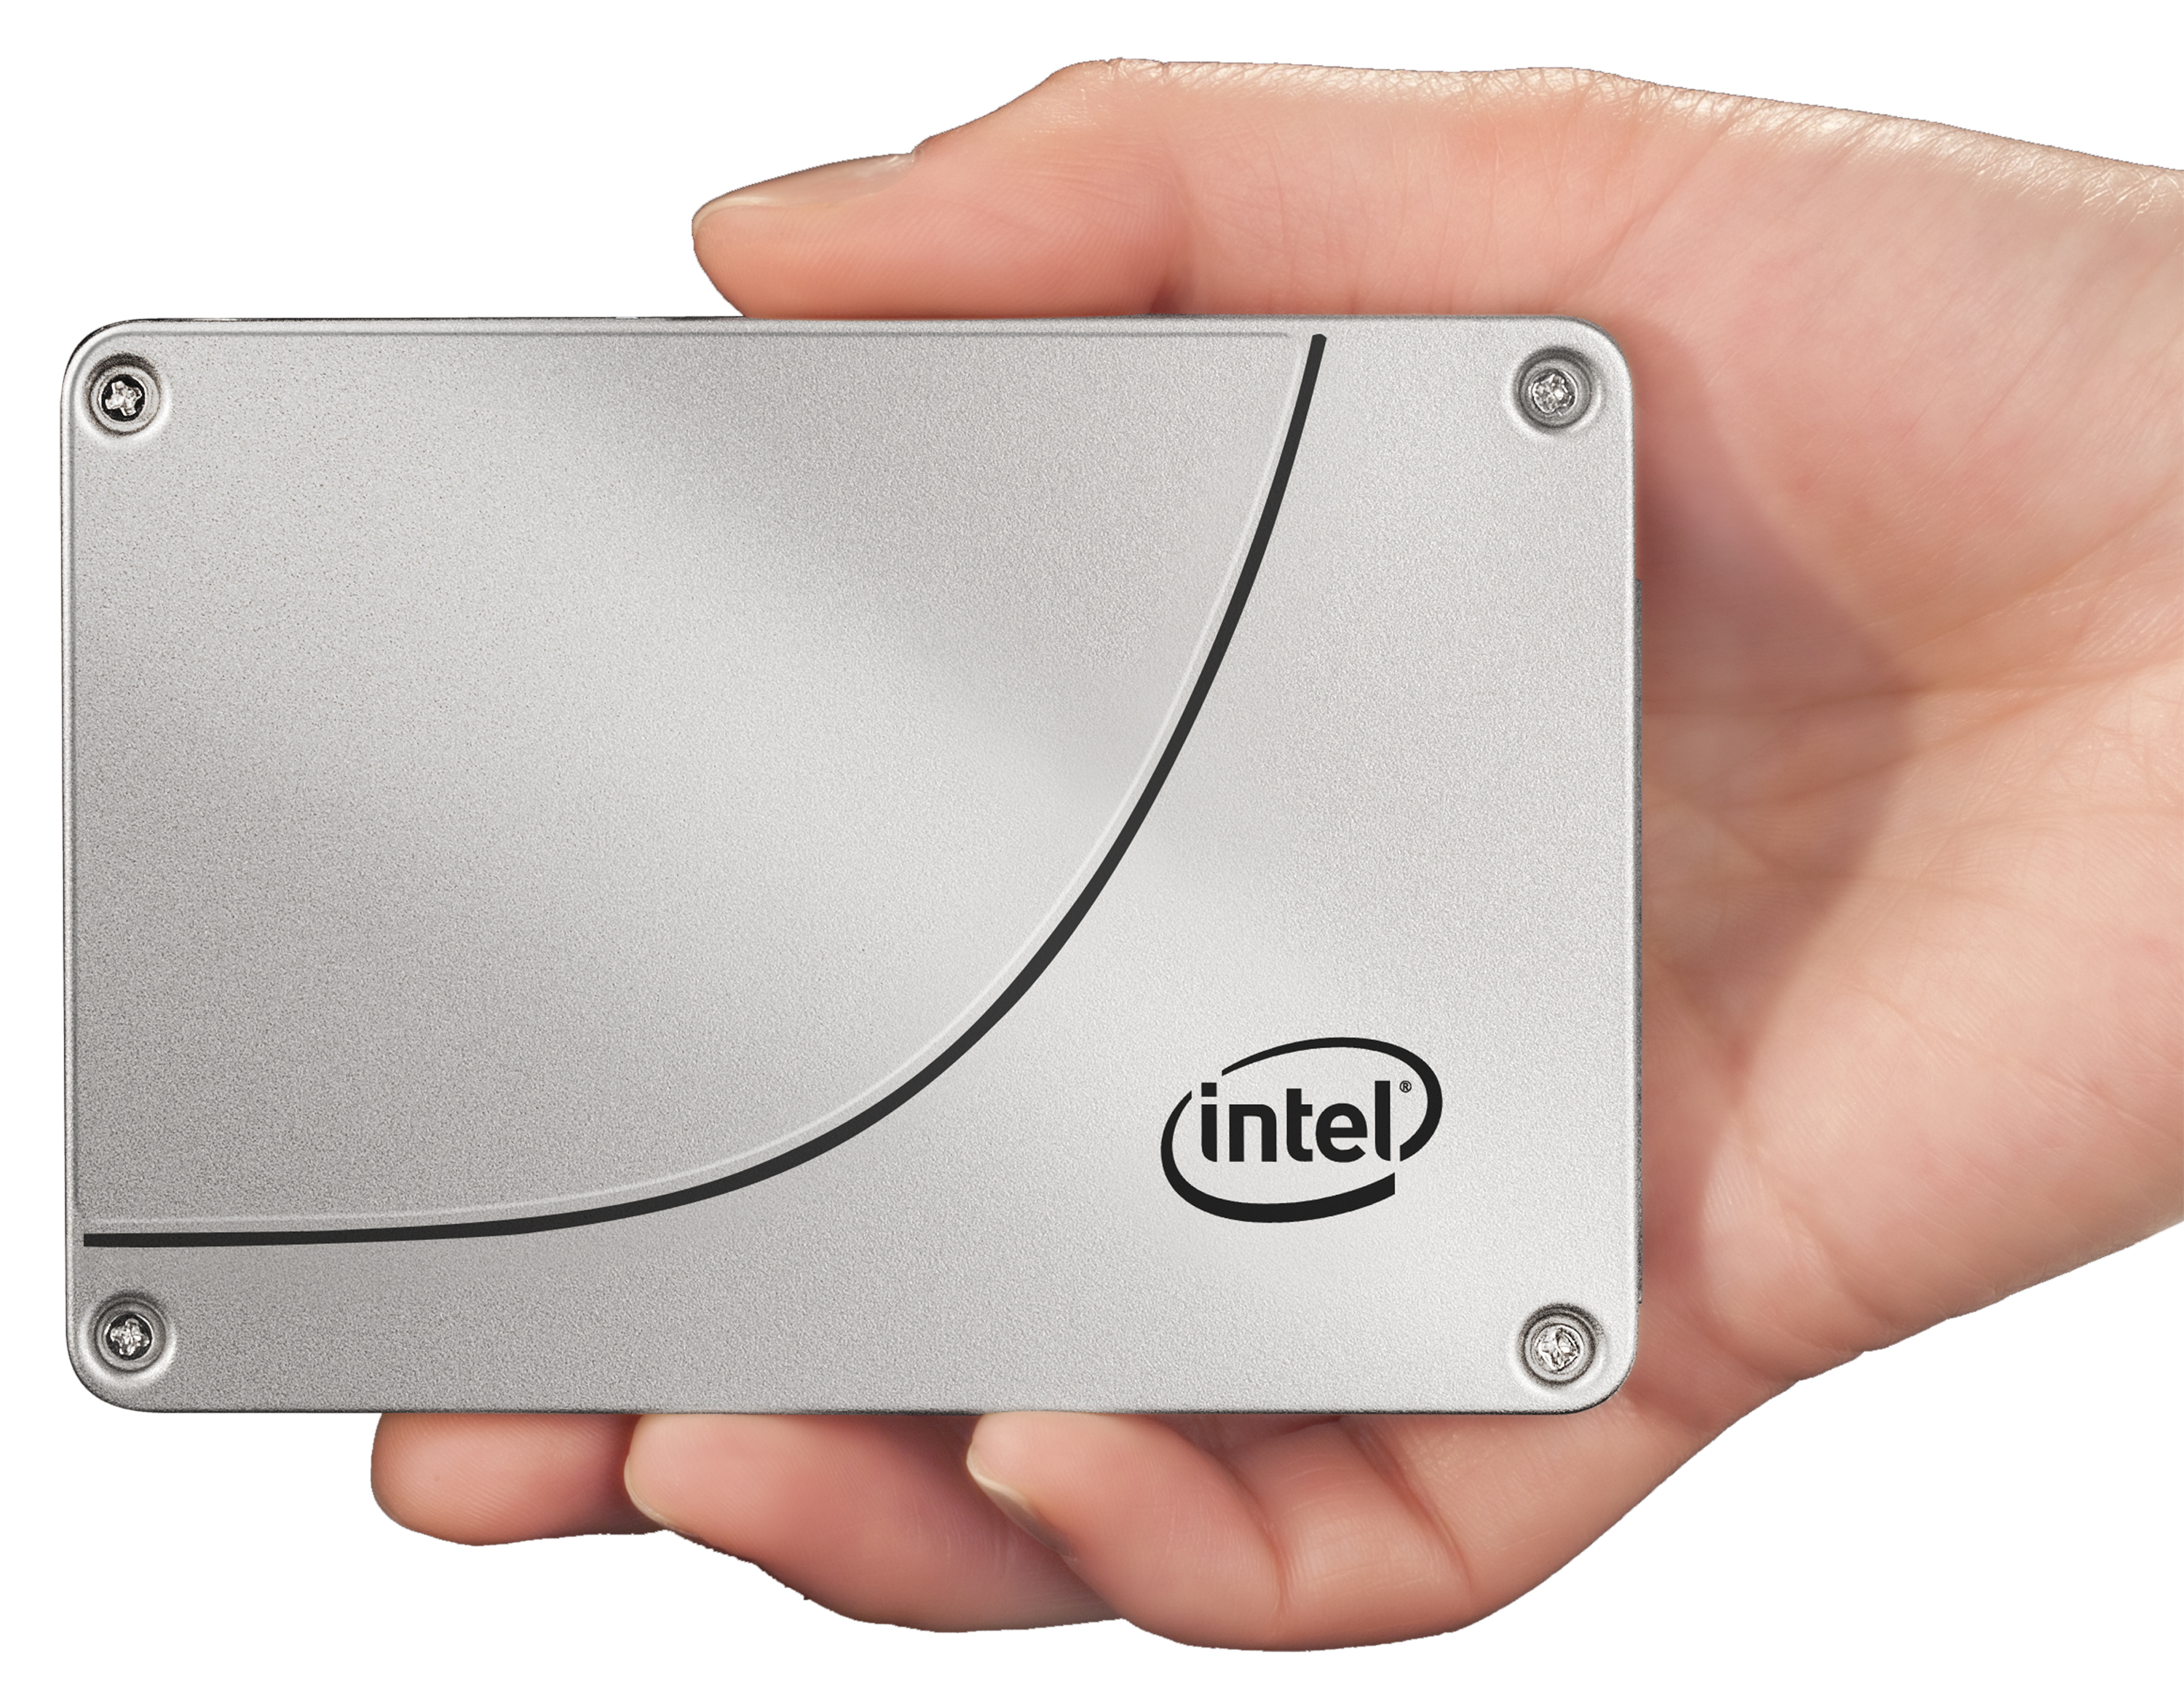 The Intel SSD DC S3700: Intel's 3rd Generation Controller Analyzed